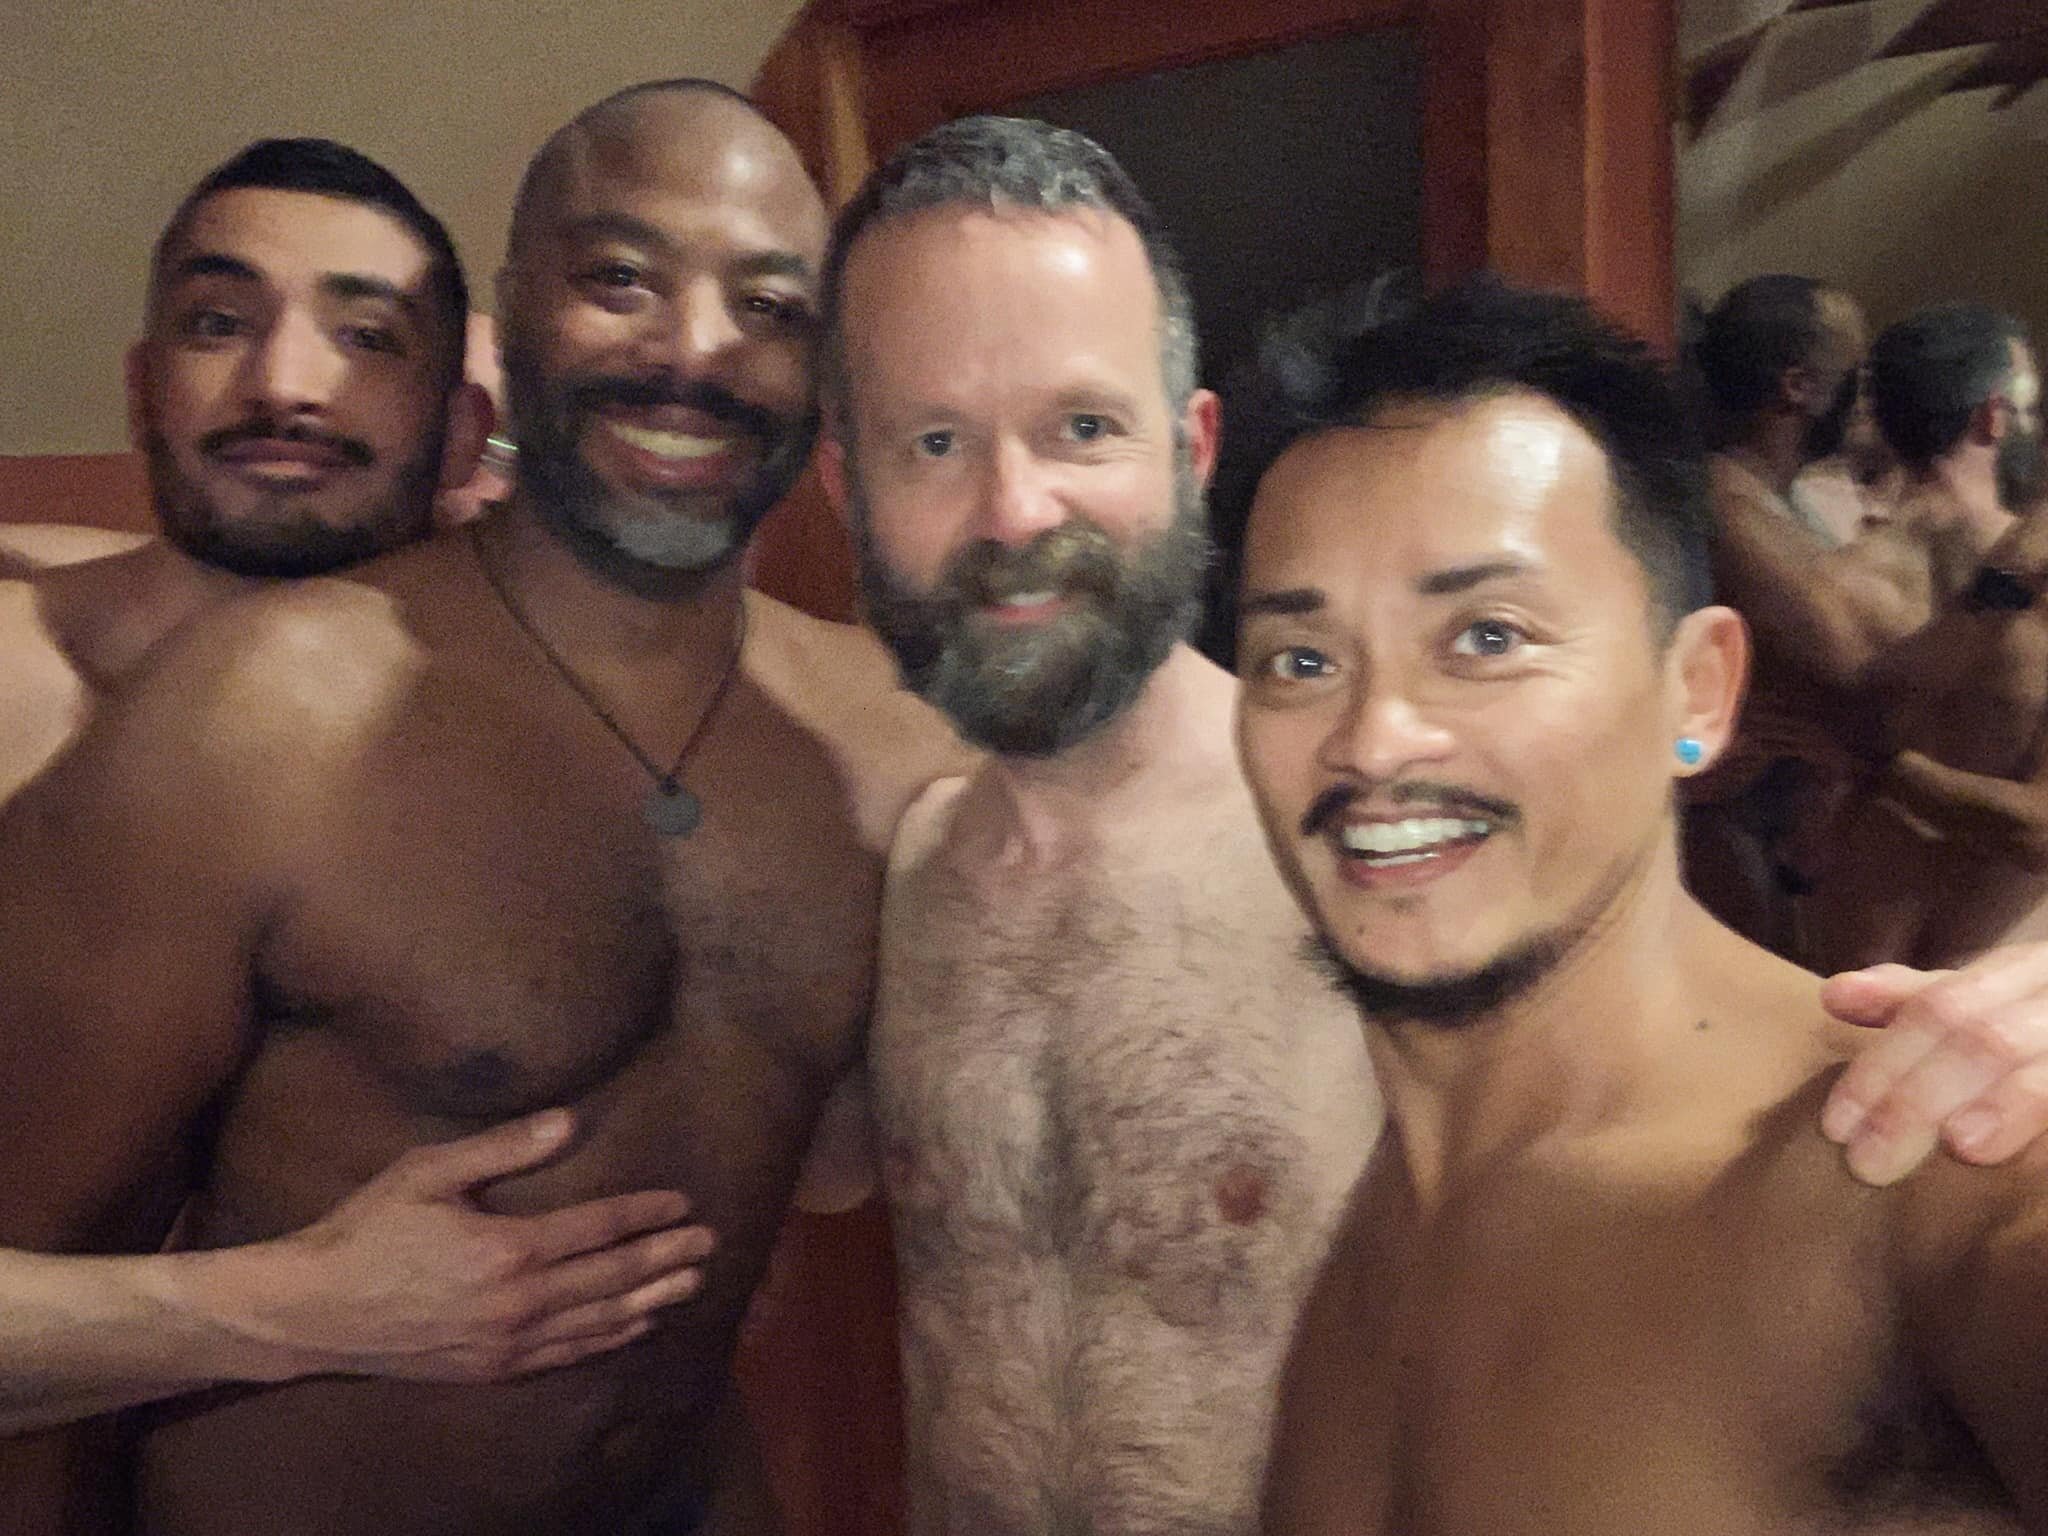 Naked yoga was literally amazeballs! Thanks to all the guys that showed up and held space for personal and collective liberation. 🌈💗✨🥰🦄